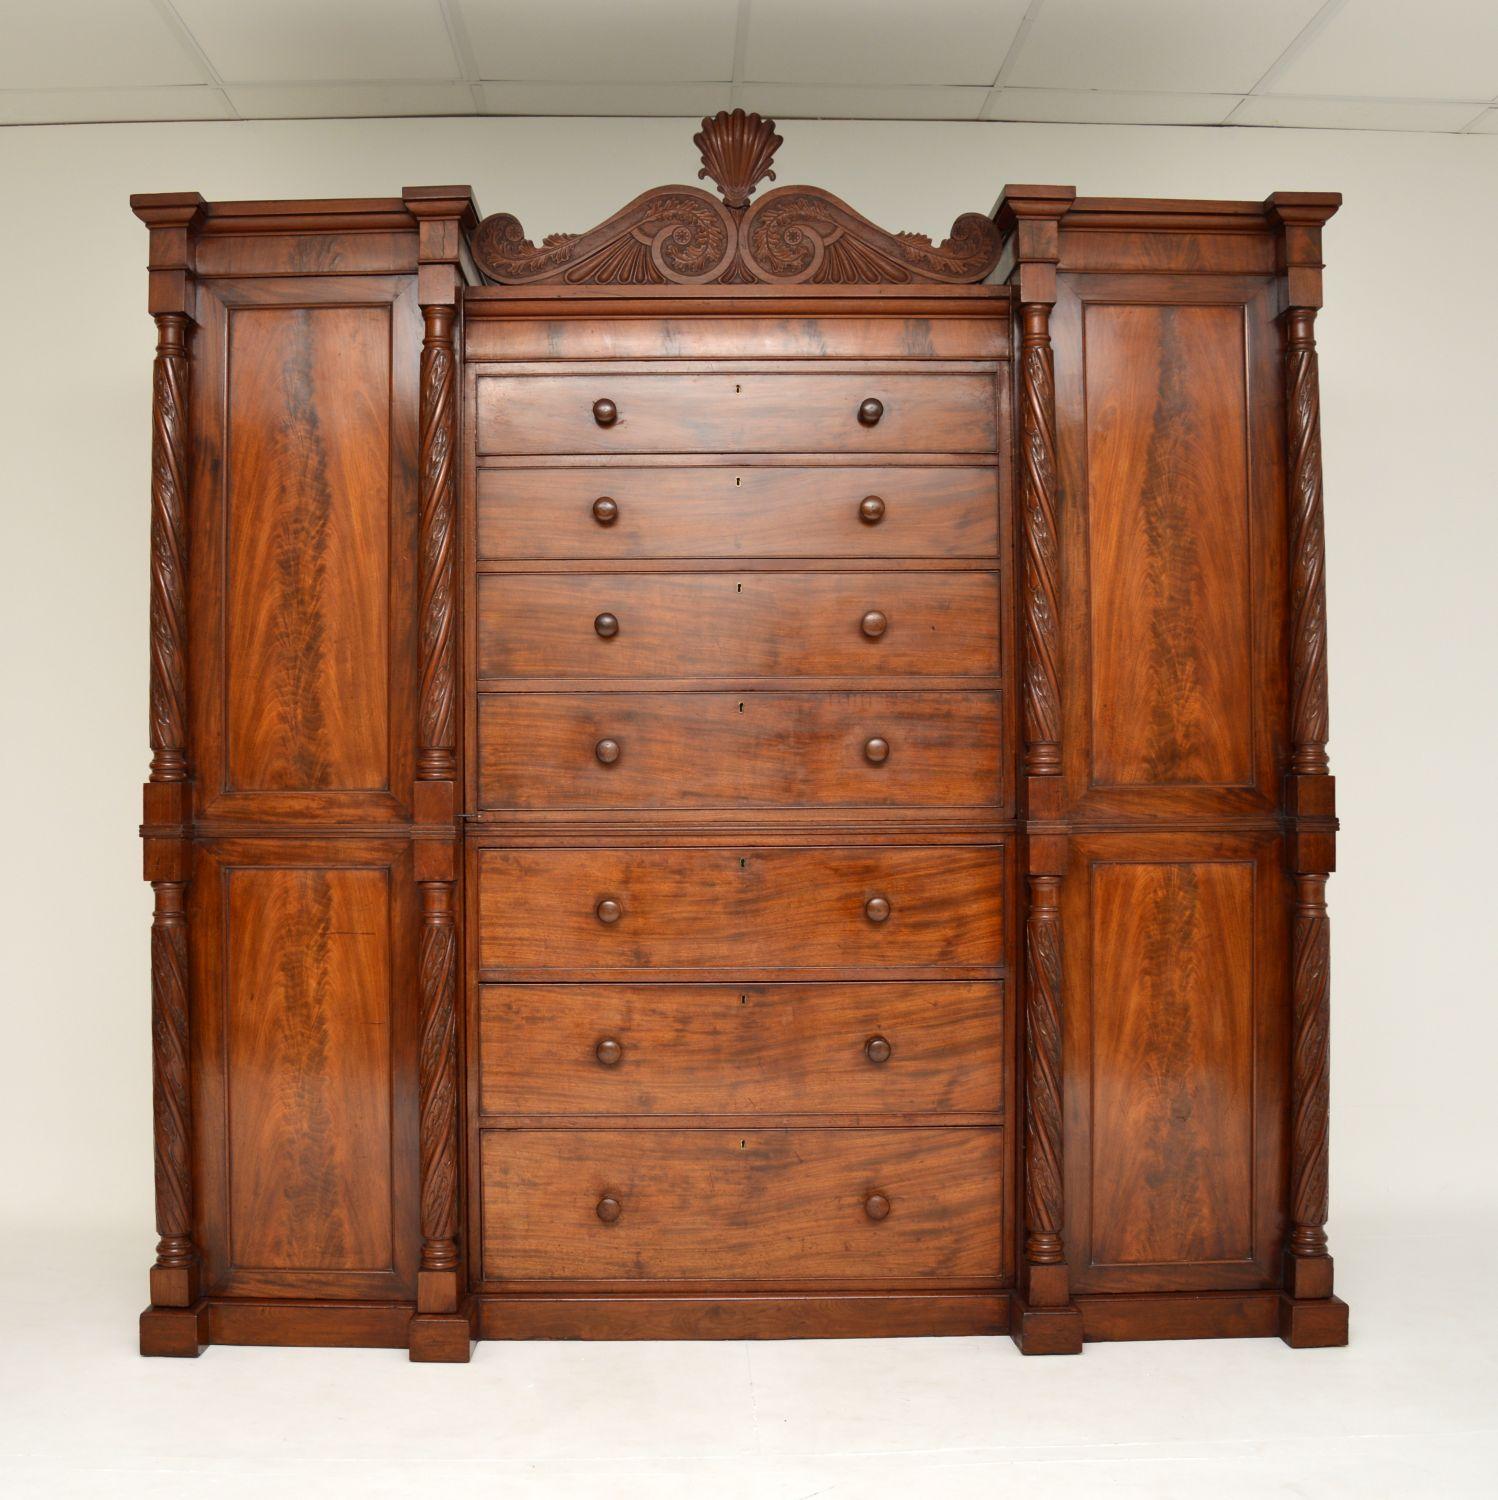 A superb antique William IV period compactum wardrobe. This was made in England & dates from around the 1830-1840’s period.

This is of amazing quality and is a most impressive piece. There are two tall sentry box style hanging compartments on